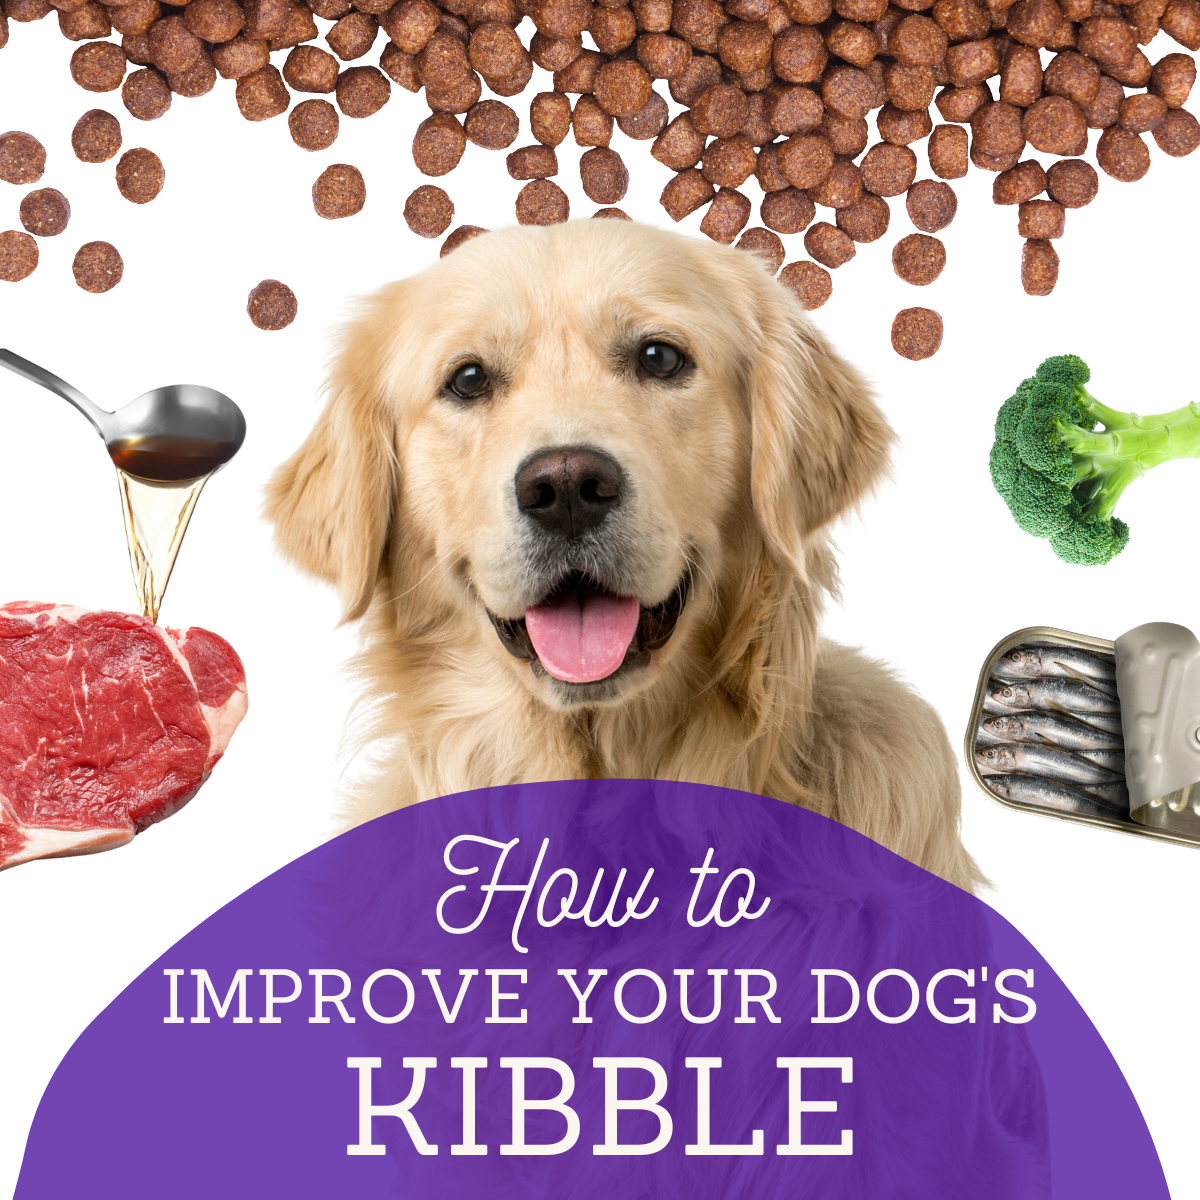 How To Improve Your Dog's Kibble eBook